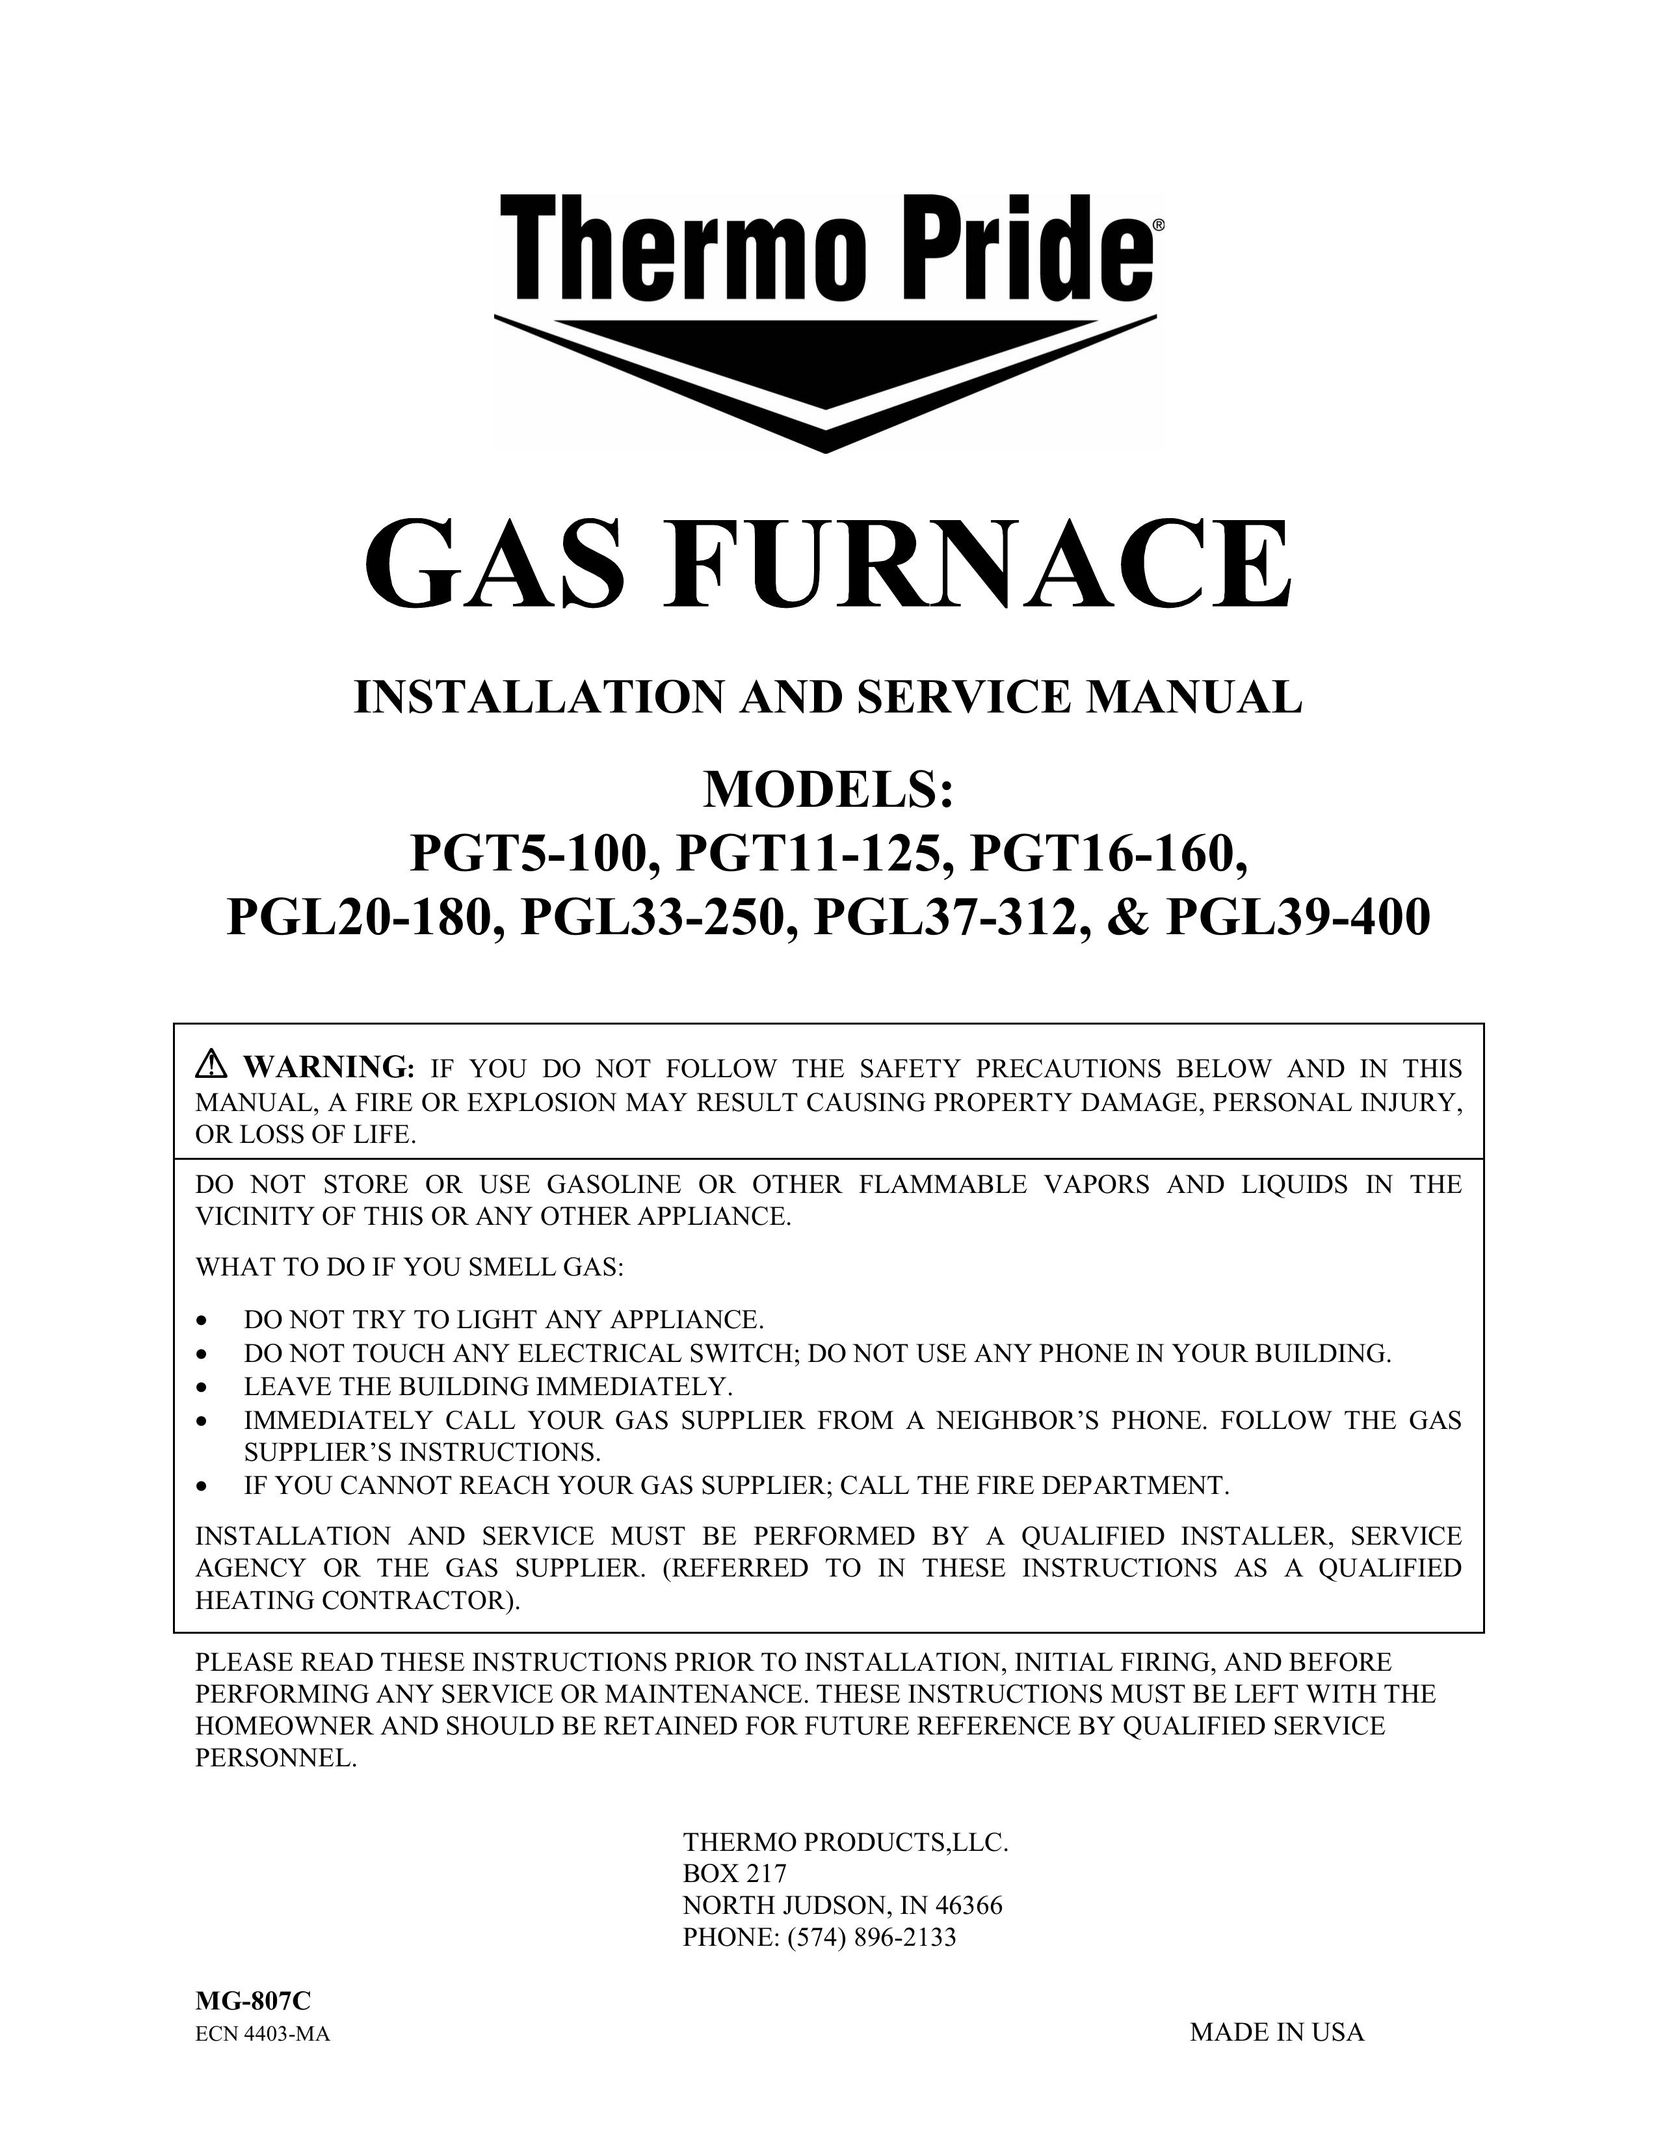 Thermo Products PGT16-160 Burner User Manual